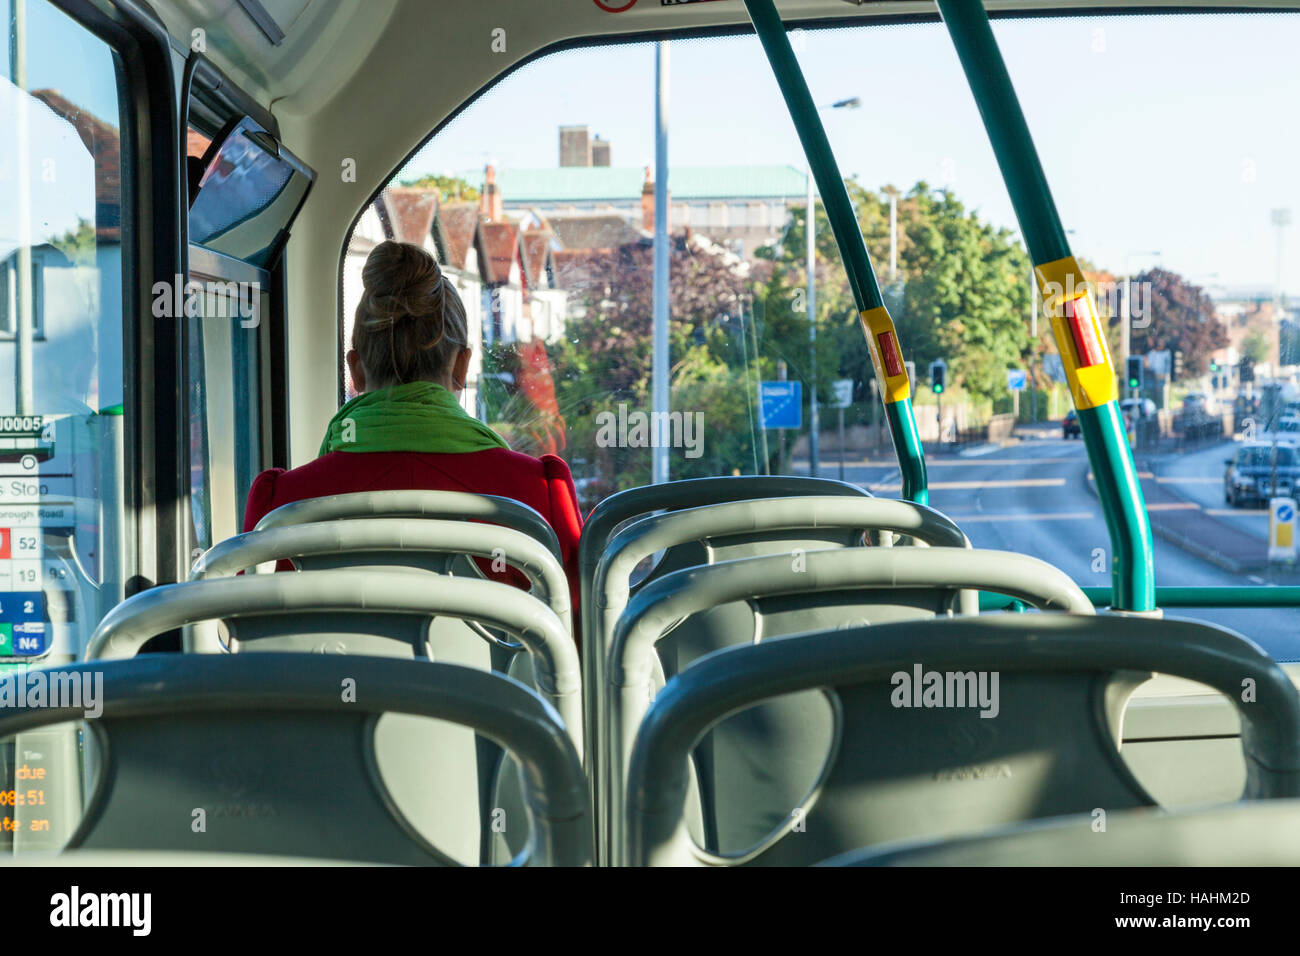 legal age to travel on a bus alone uk